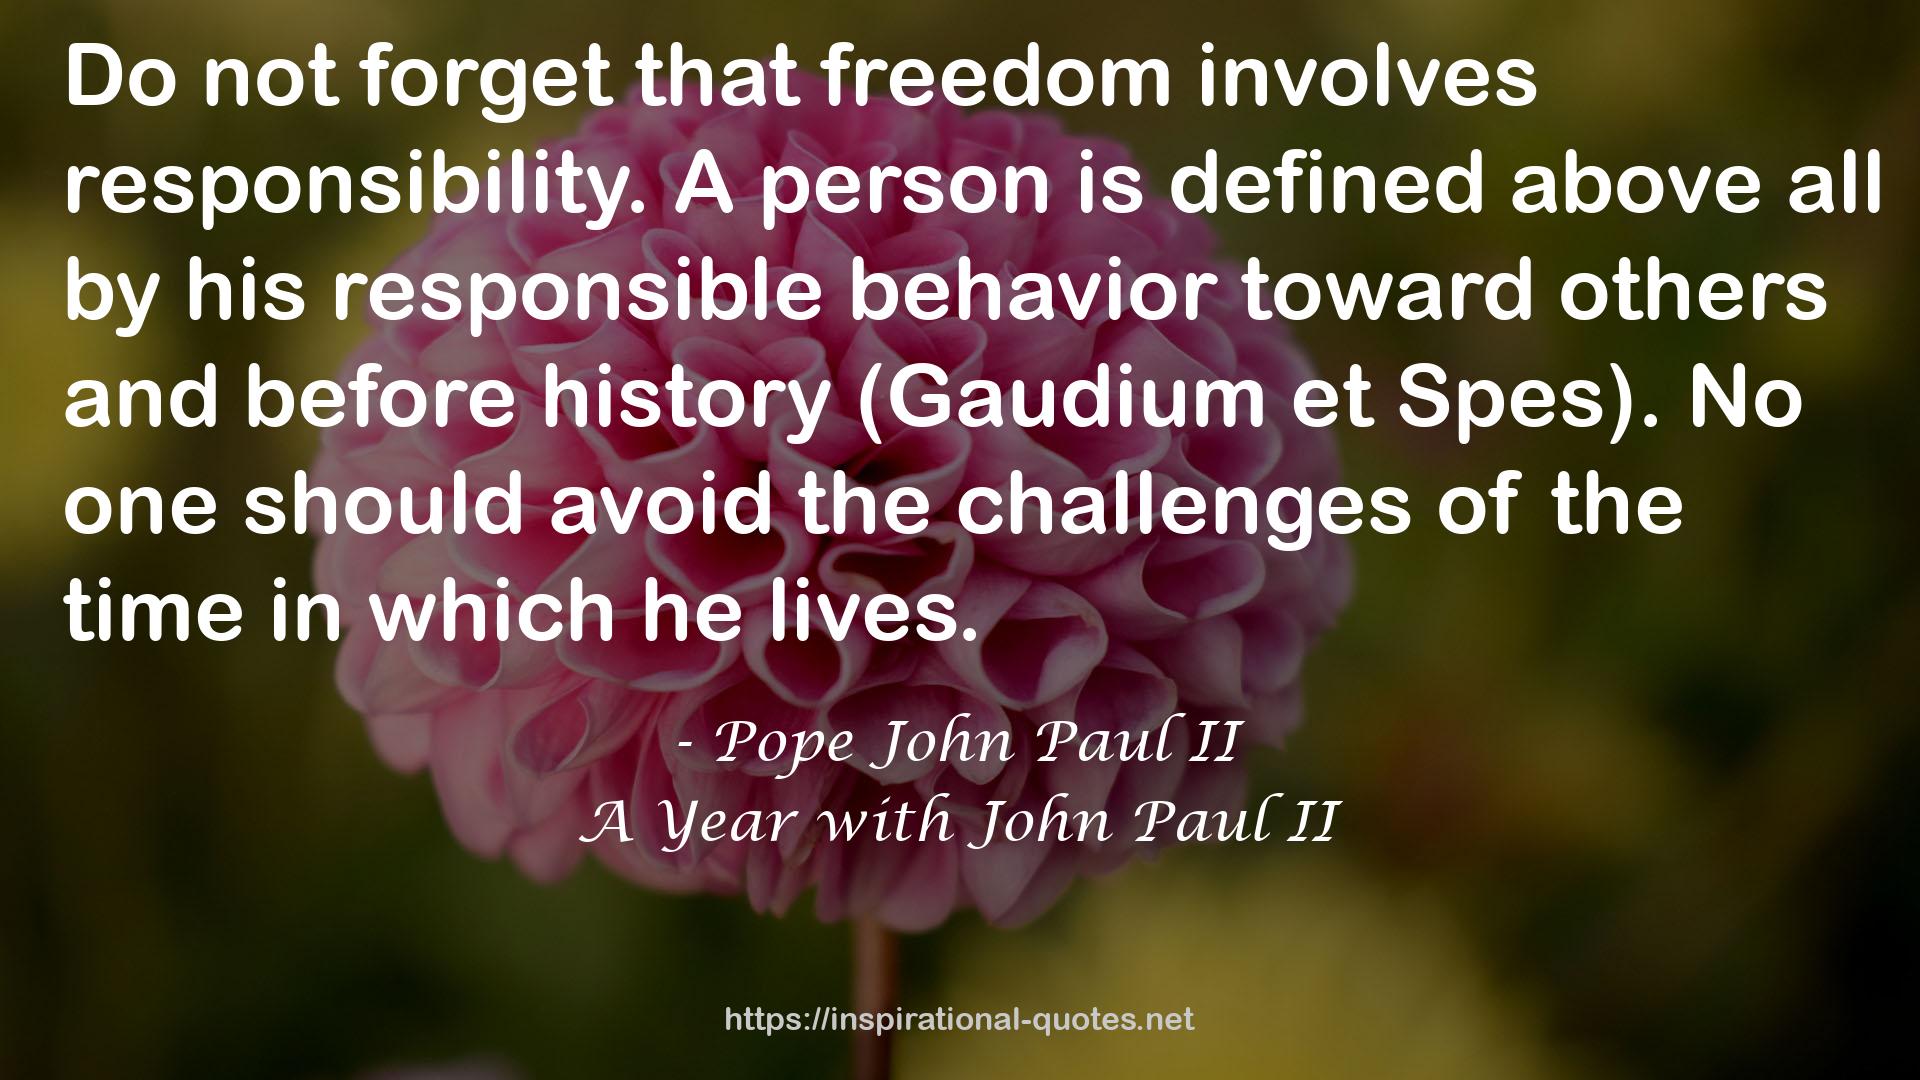 A Year with John Paul II QUOTES